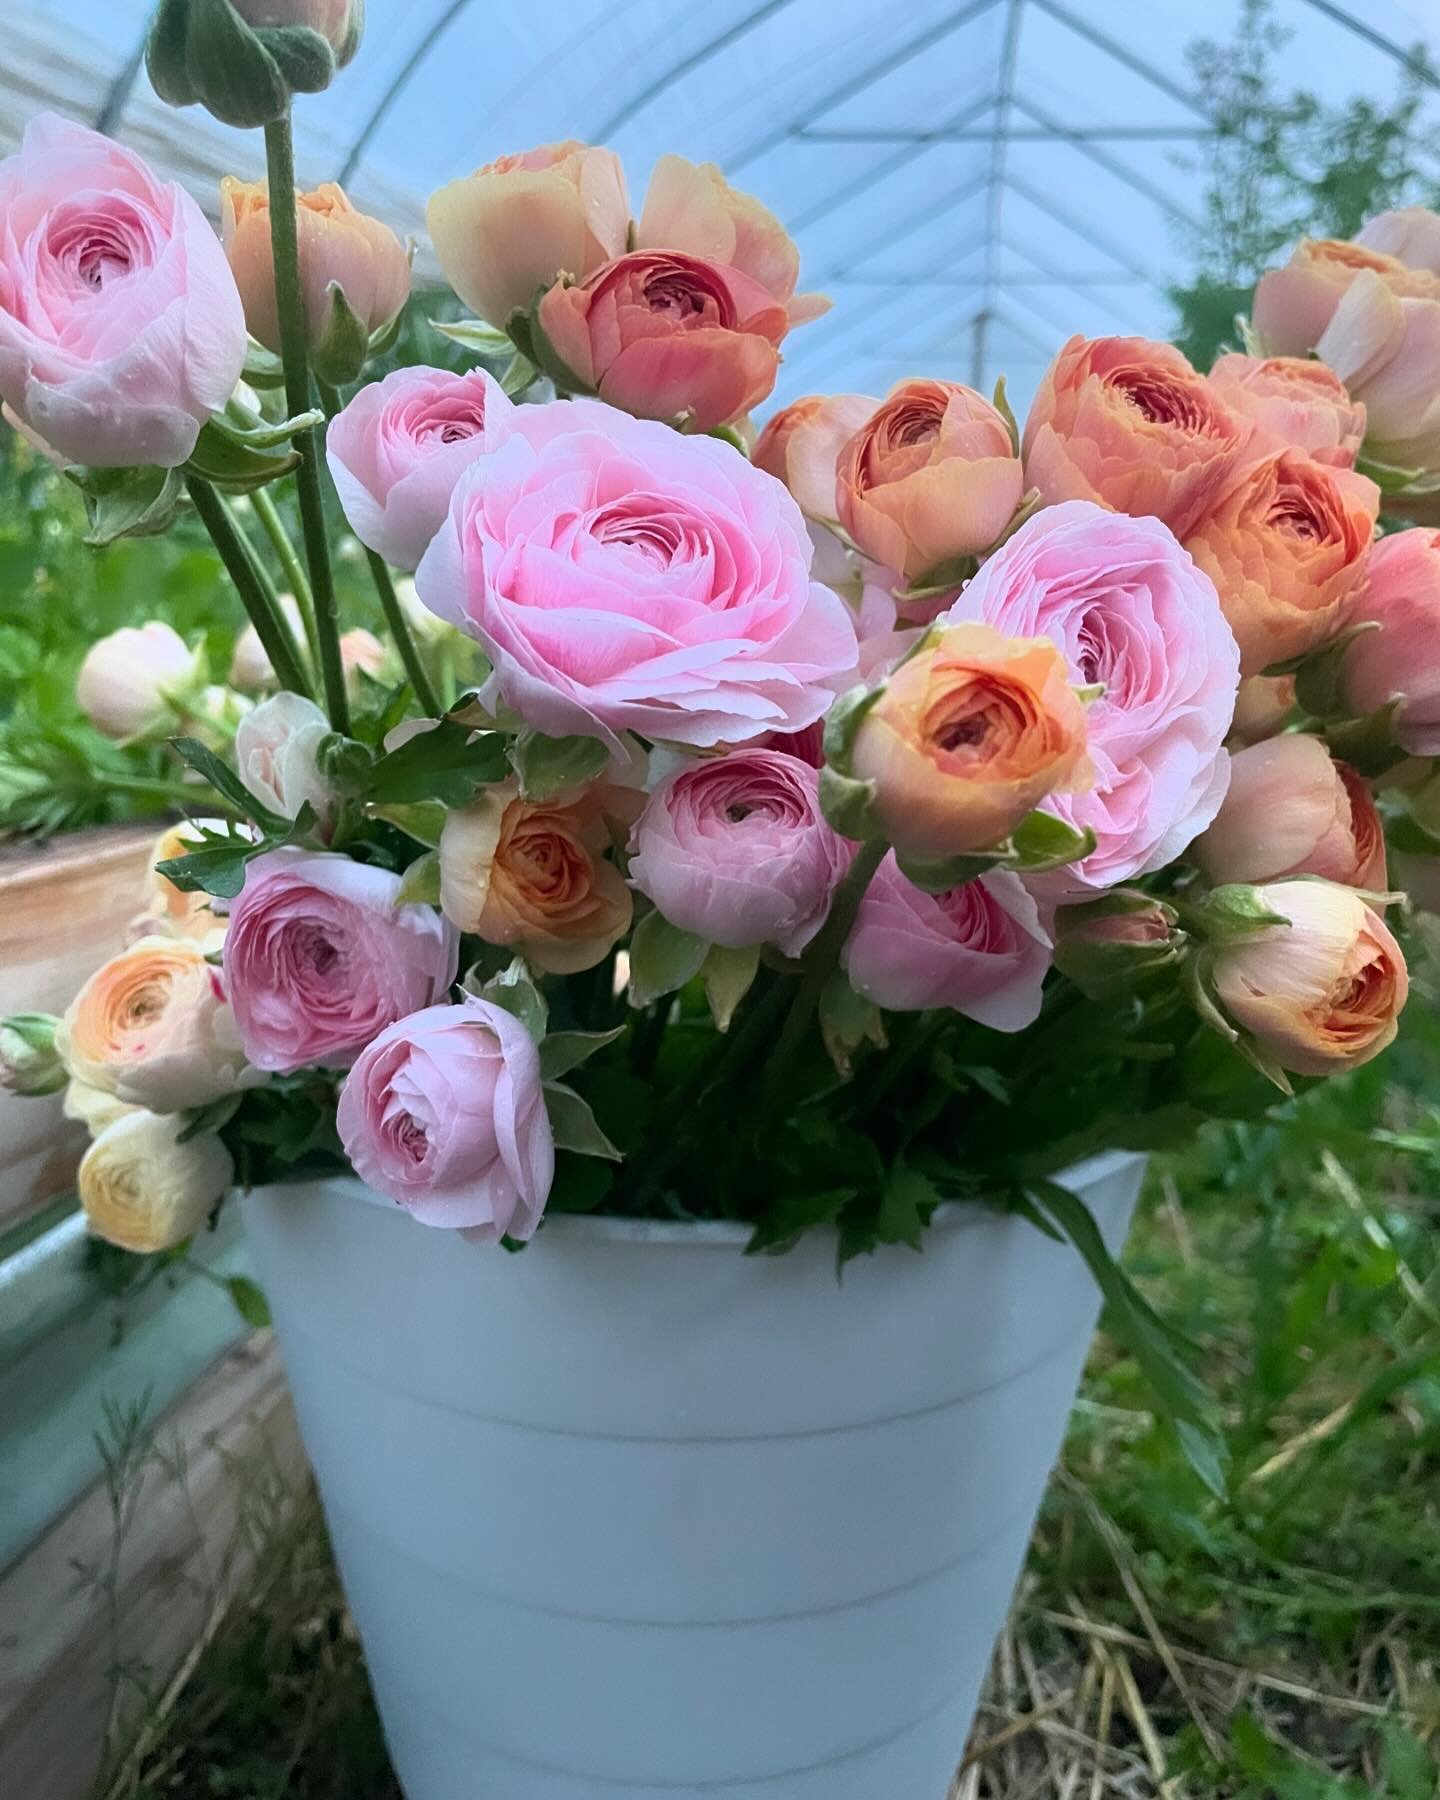 Sometimes I can&rsquo;t believe that I grew these flowers. These colors have been out of this world! I think I finally hit my growing stride with ranunculus&mdash;understanding when to  pre-sprout, plant and harvest. Now once they have died back, I w